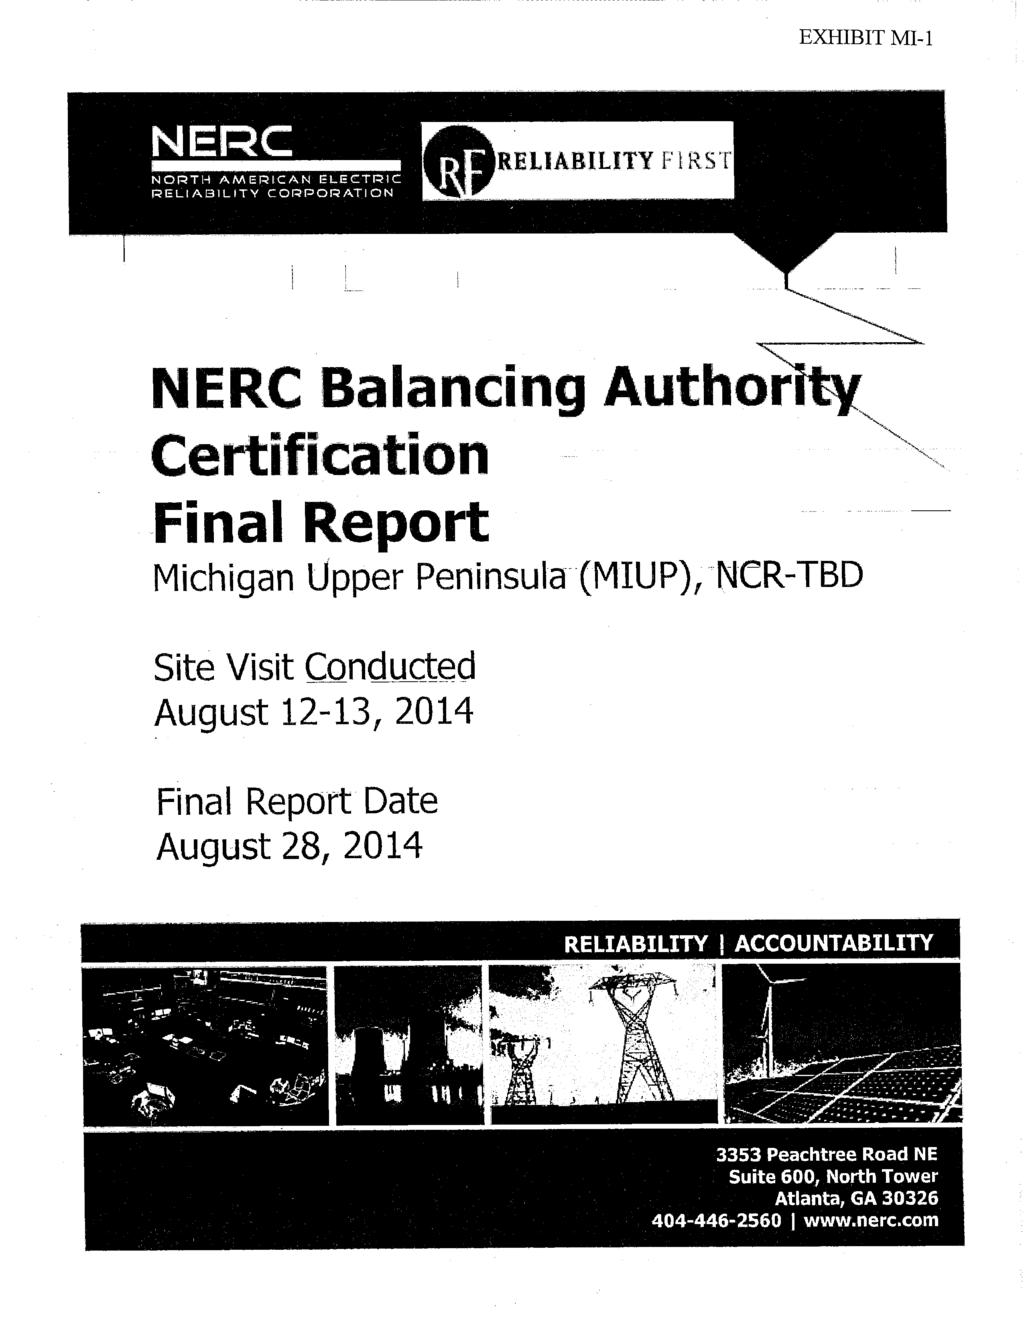 (1). NERC REL NORTH AMERICAN ELECTRIC RELIABILITY CORPORATION ABILITY st EXHIBIT MI-1 NERC Balancing Author Certification Final Report Michigan Upper Peninsula (MIUP), NCR-TBD Site